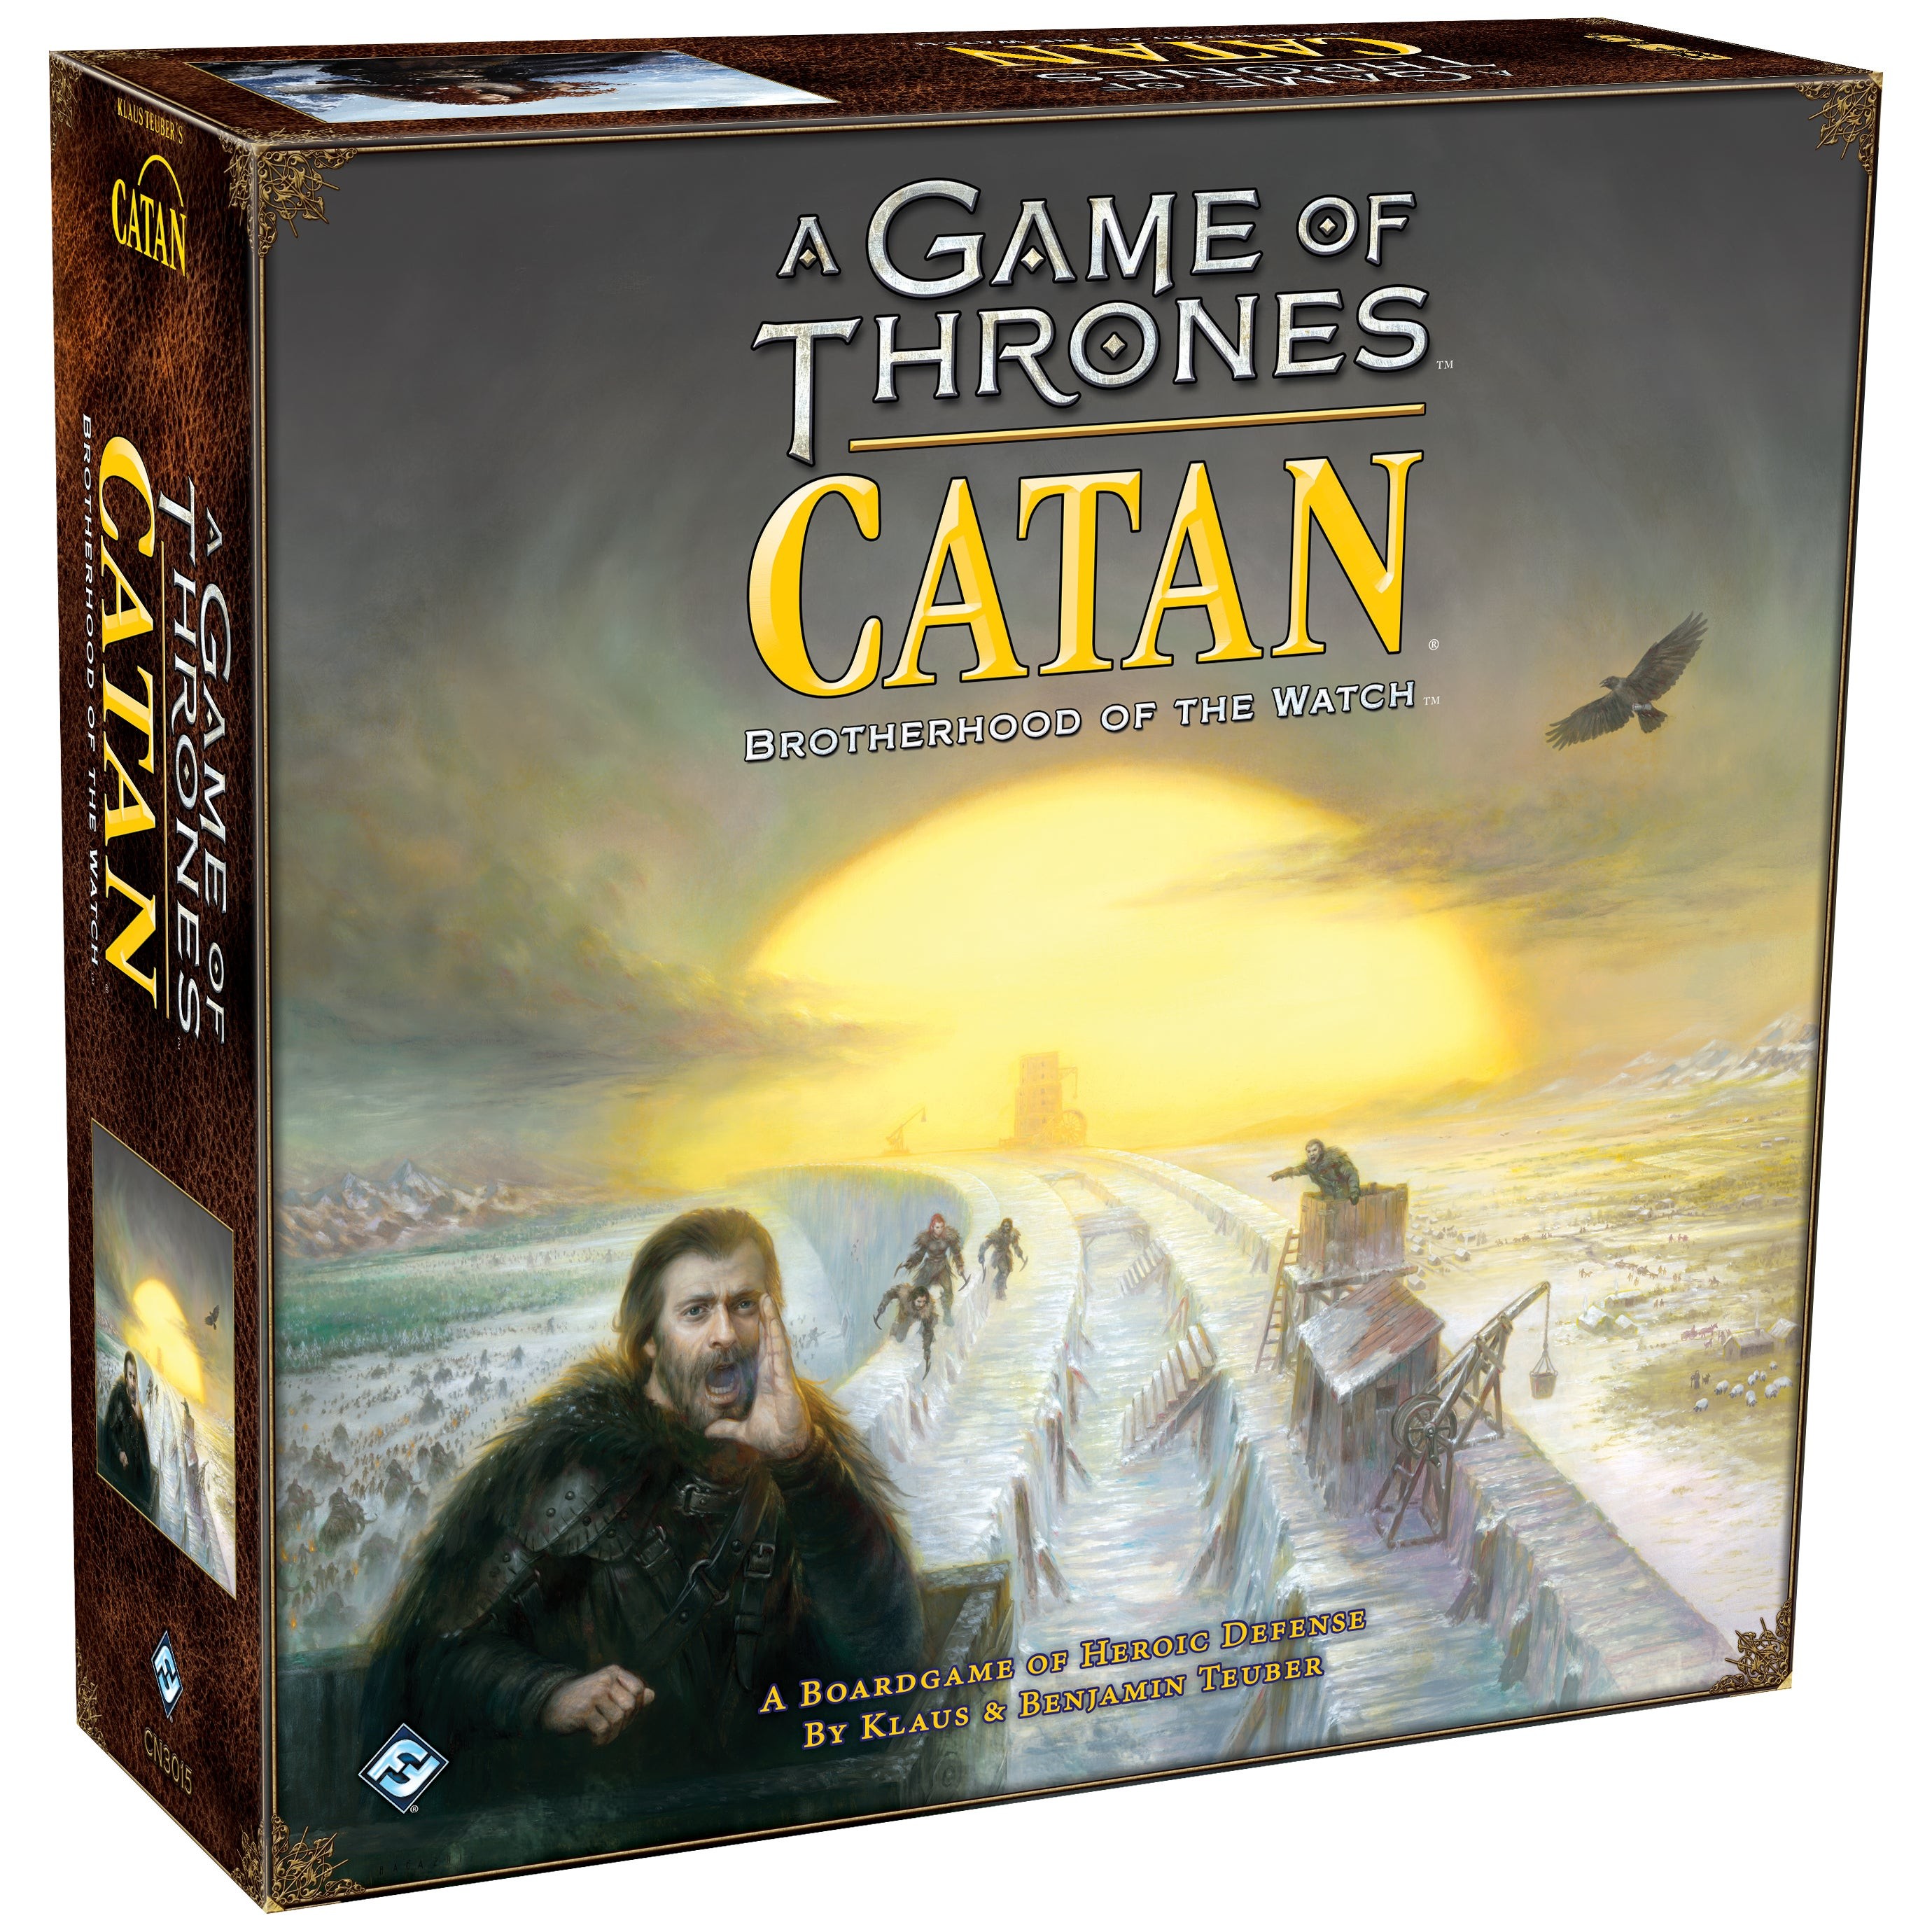 A Game of Thrones Catan: Brotherhood of the Watch Game